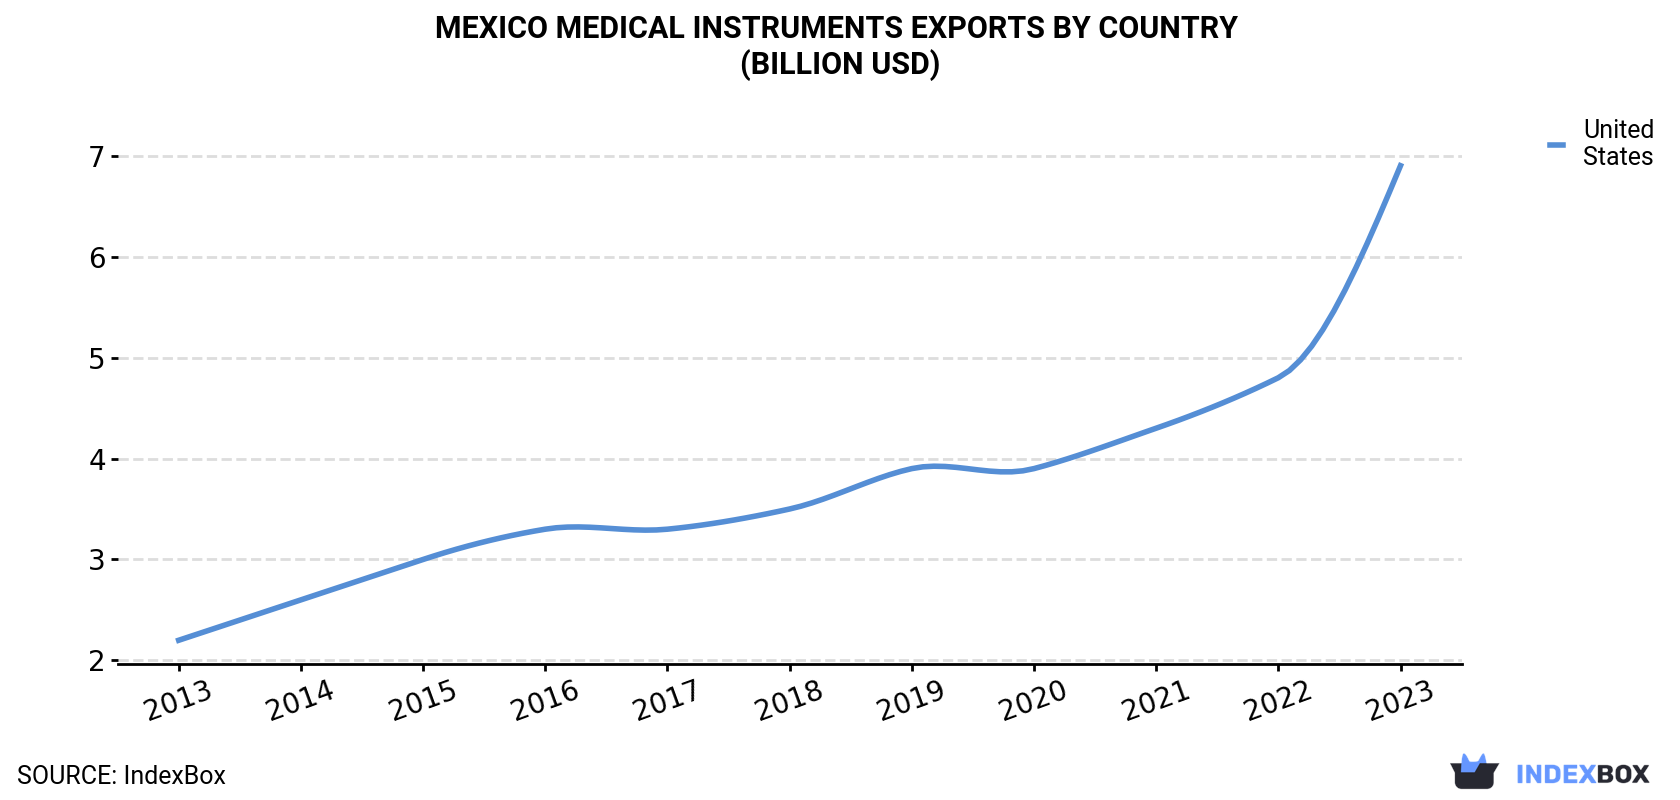 Mexico Medical Instruments Exports By Country (Billion USD)